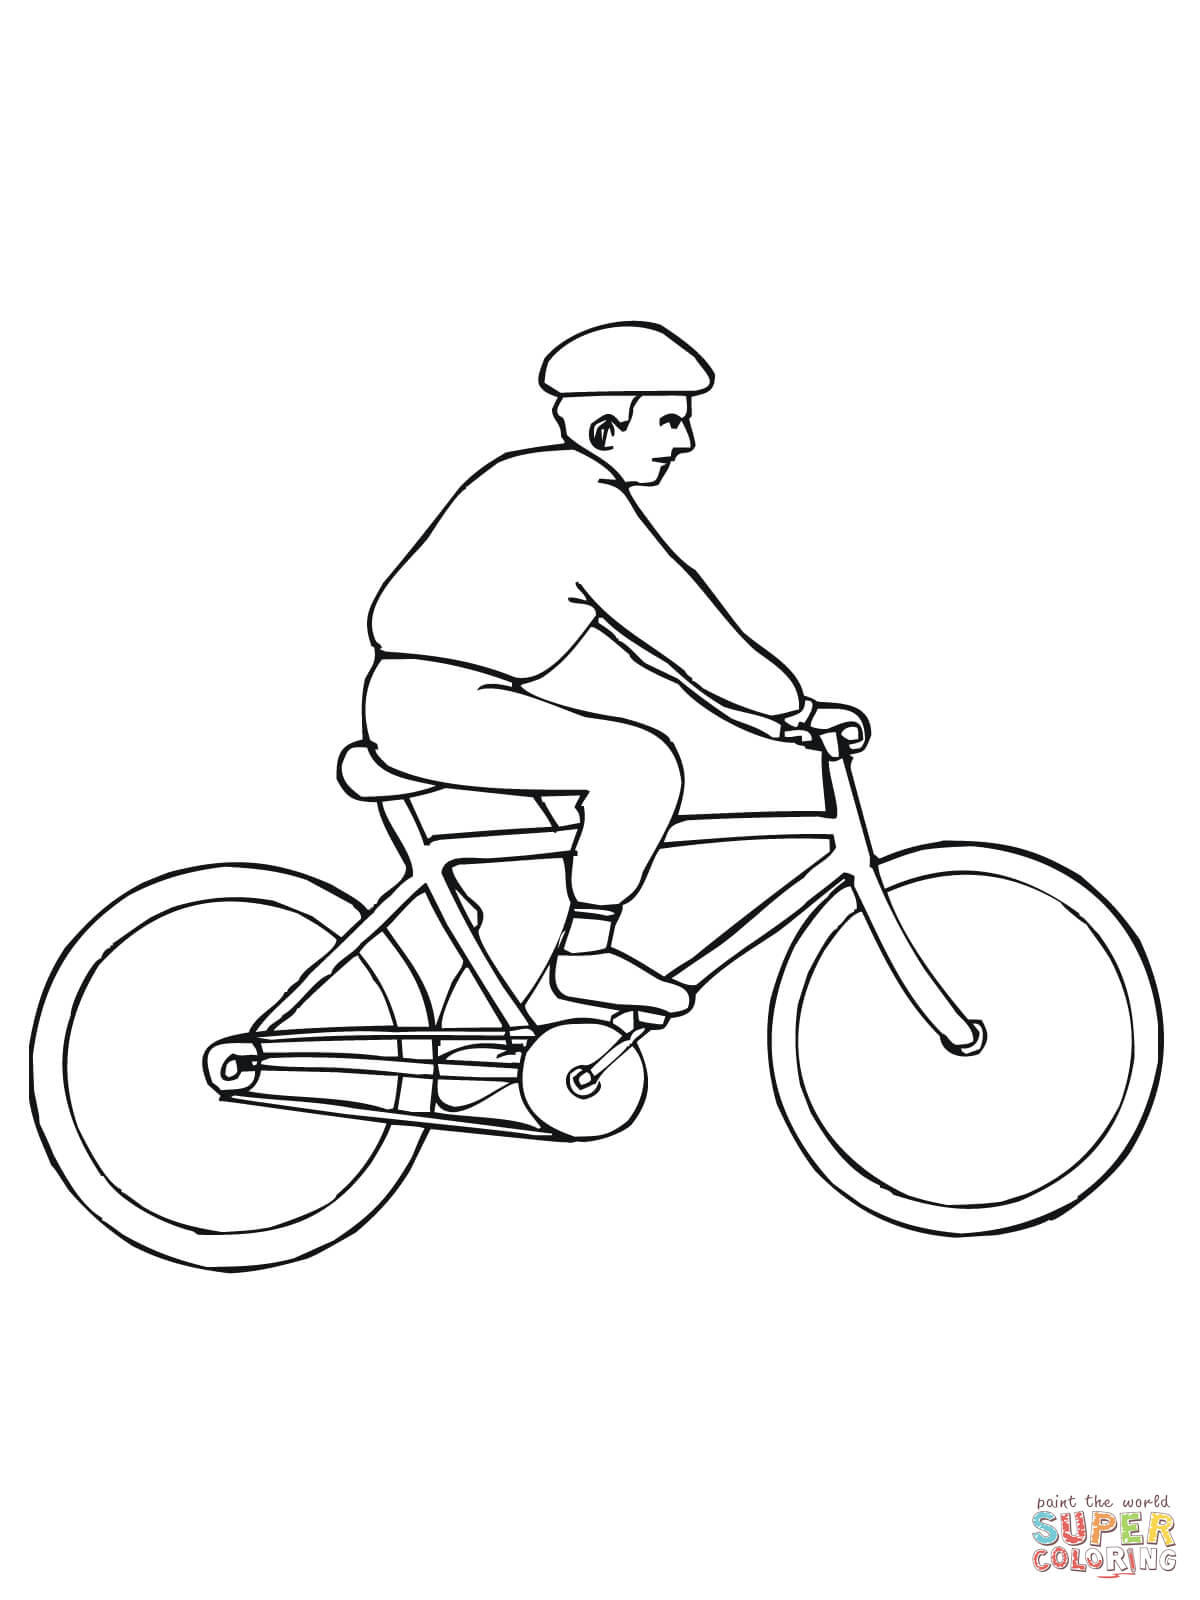 Road Bike coloring page | Free Printable Coloring Pages